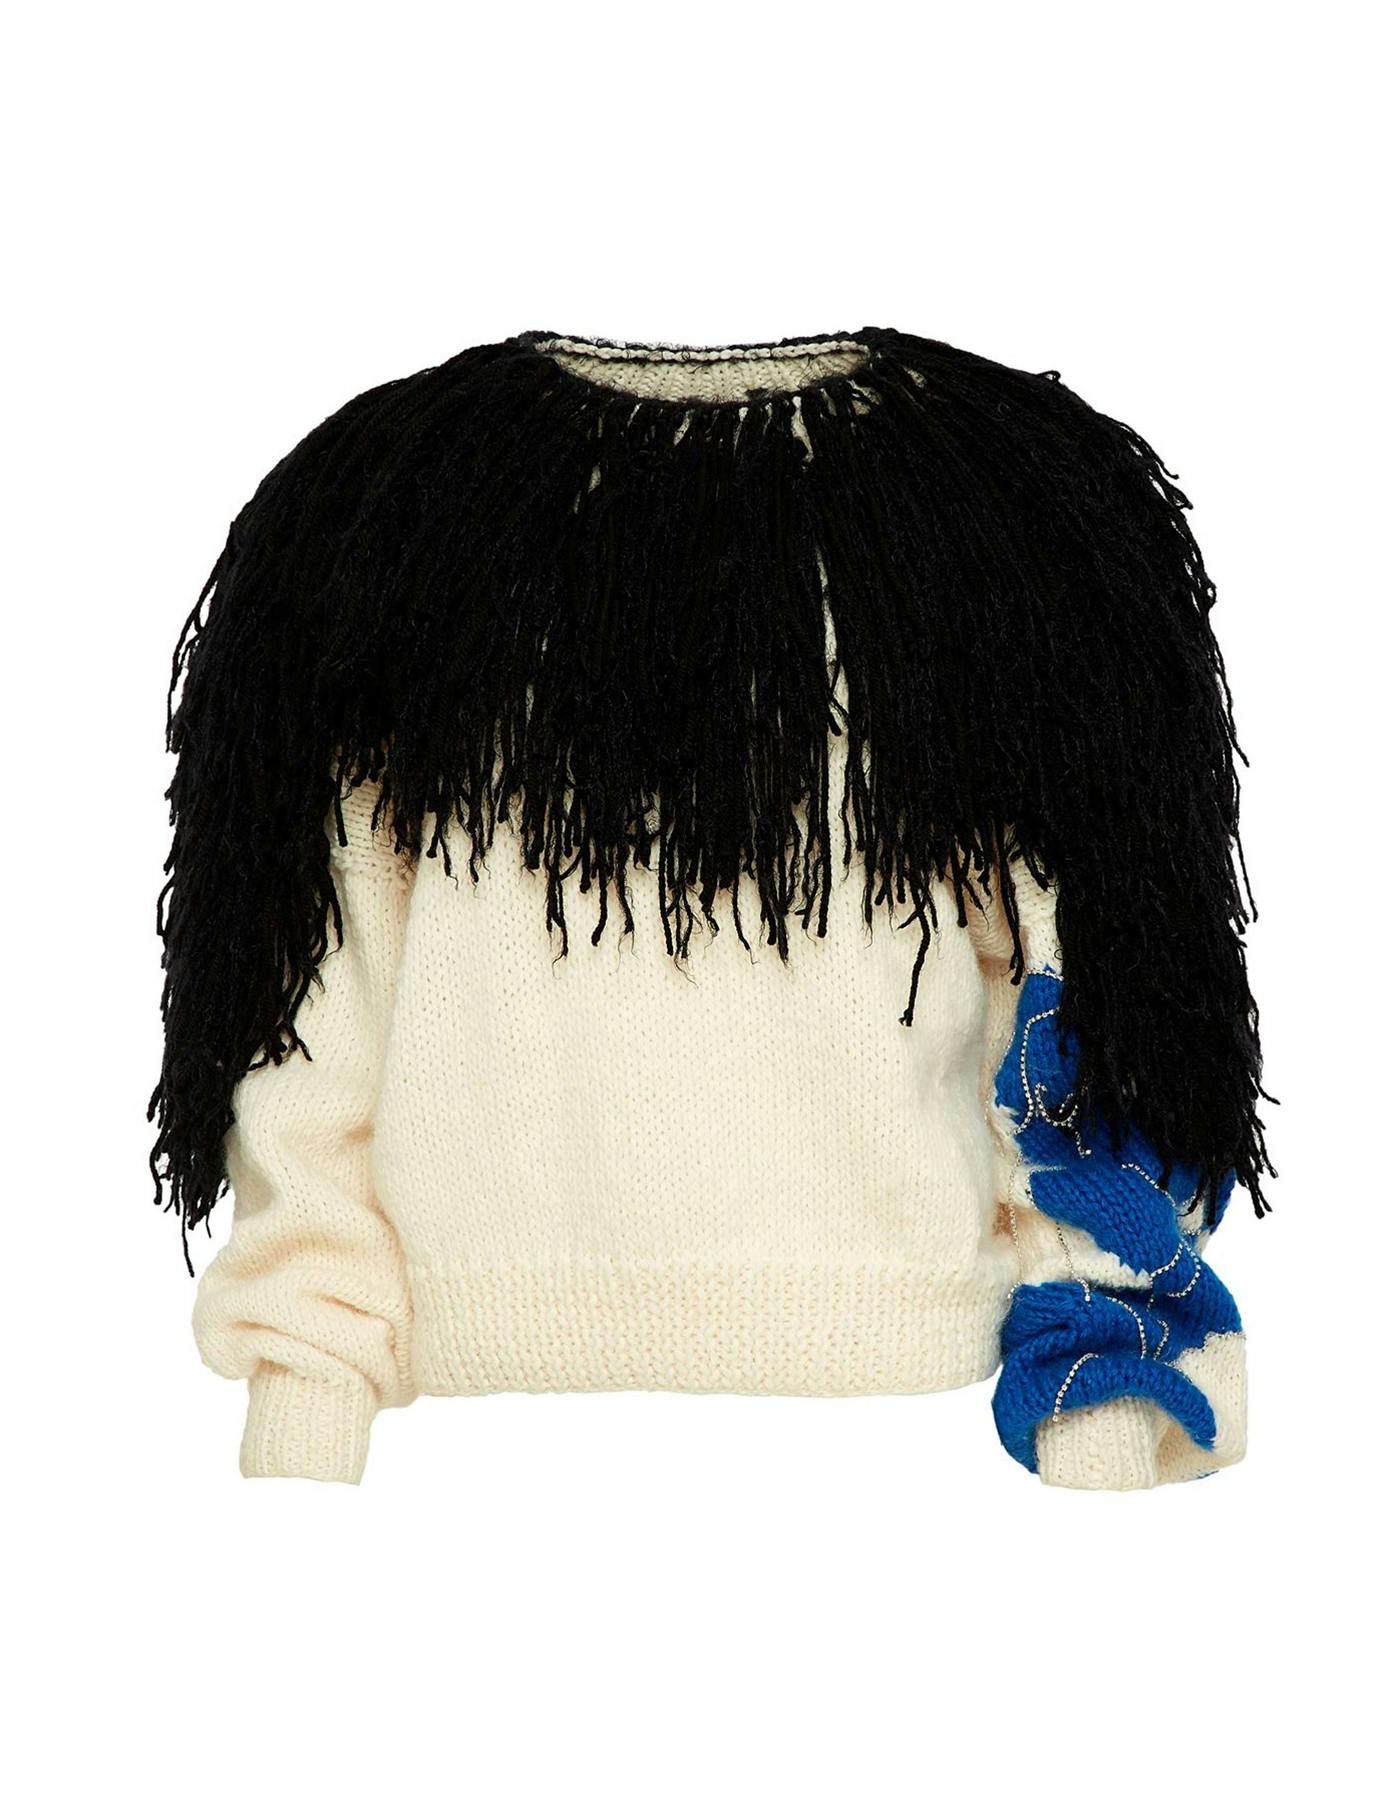 Hand-Knitted Fringed Sweater, a product by BLIKVANGER